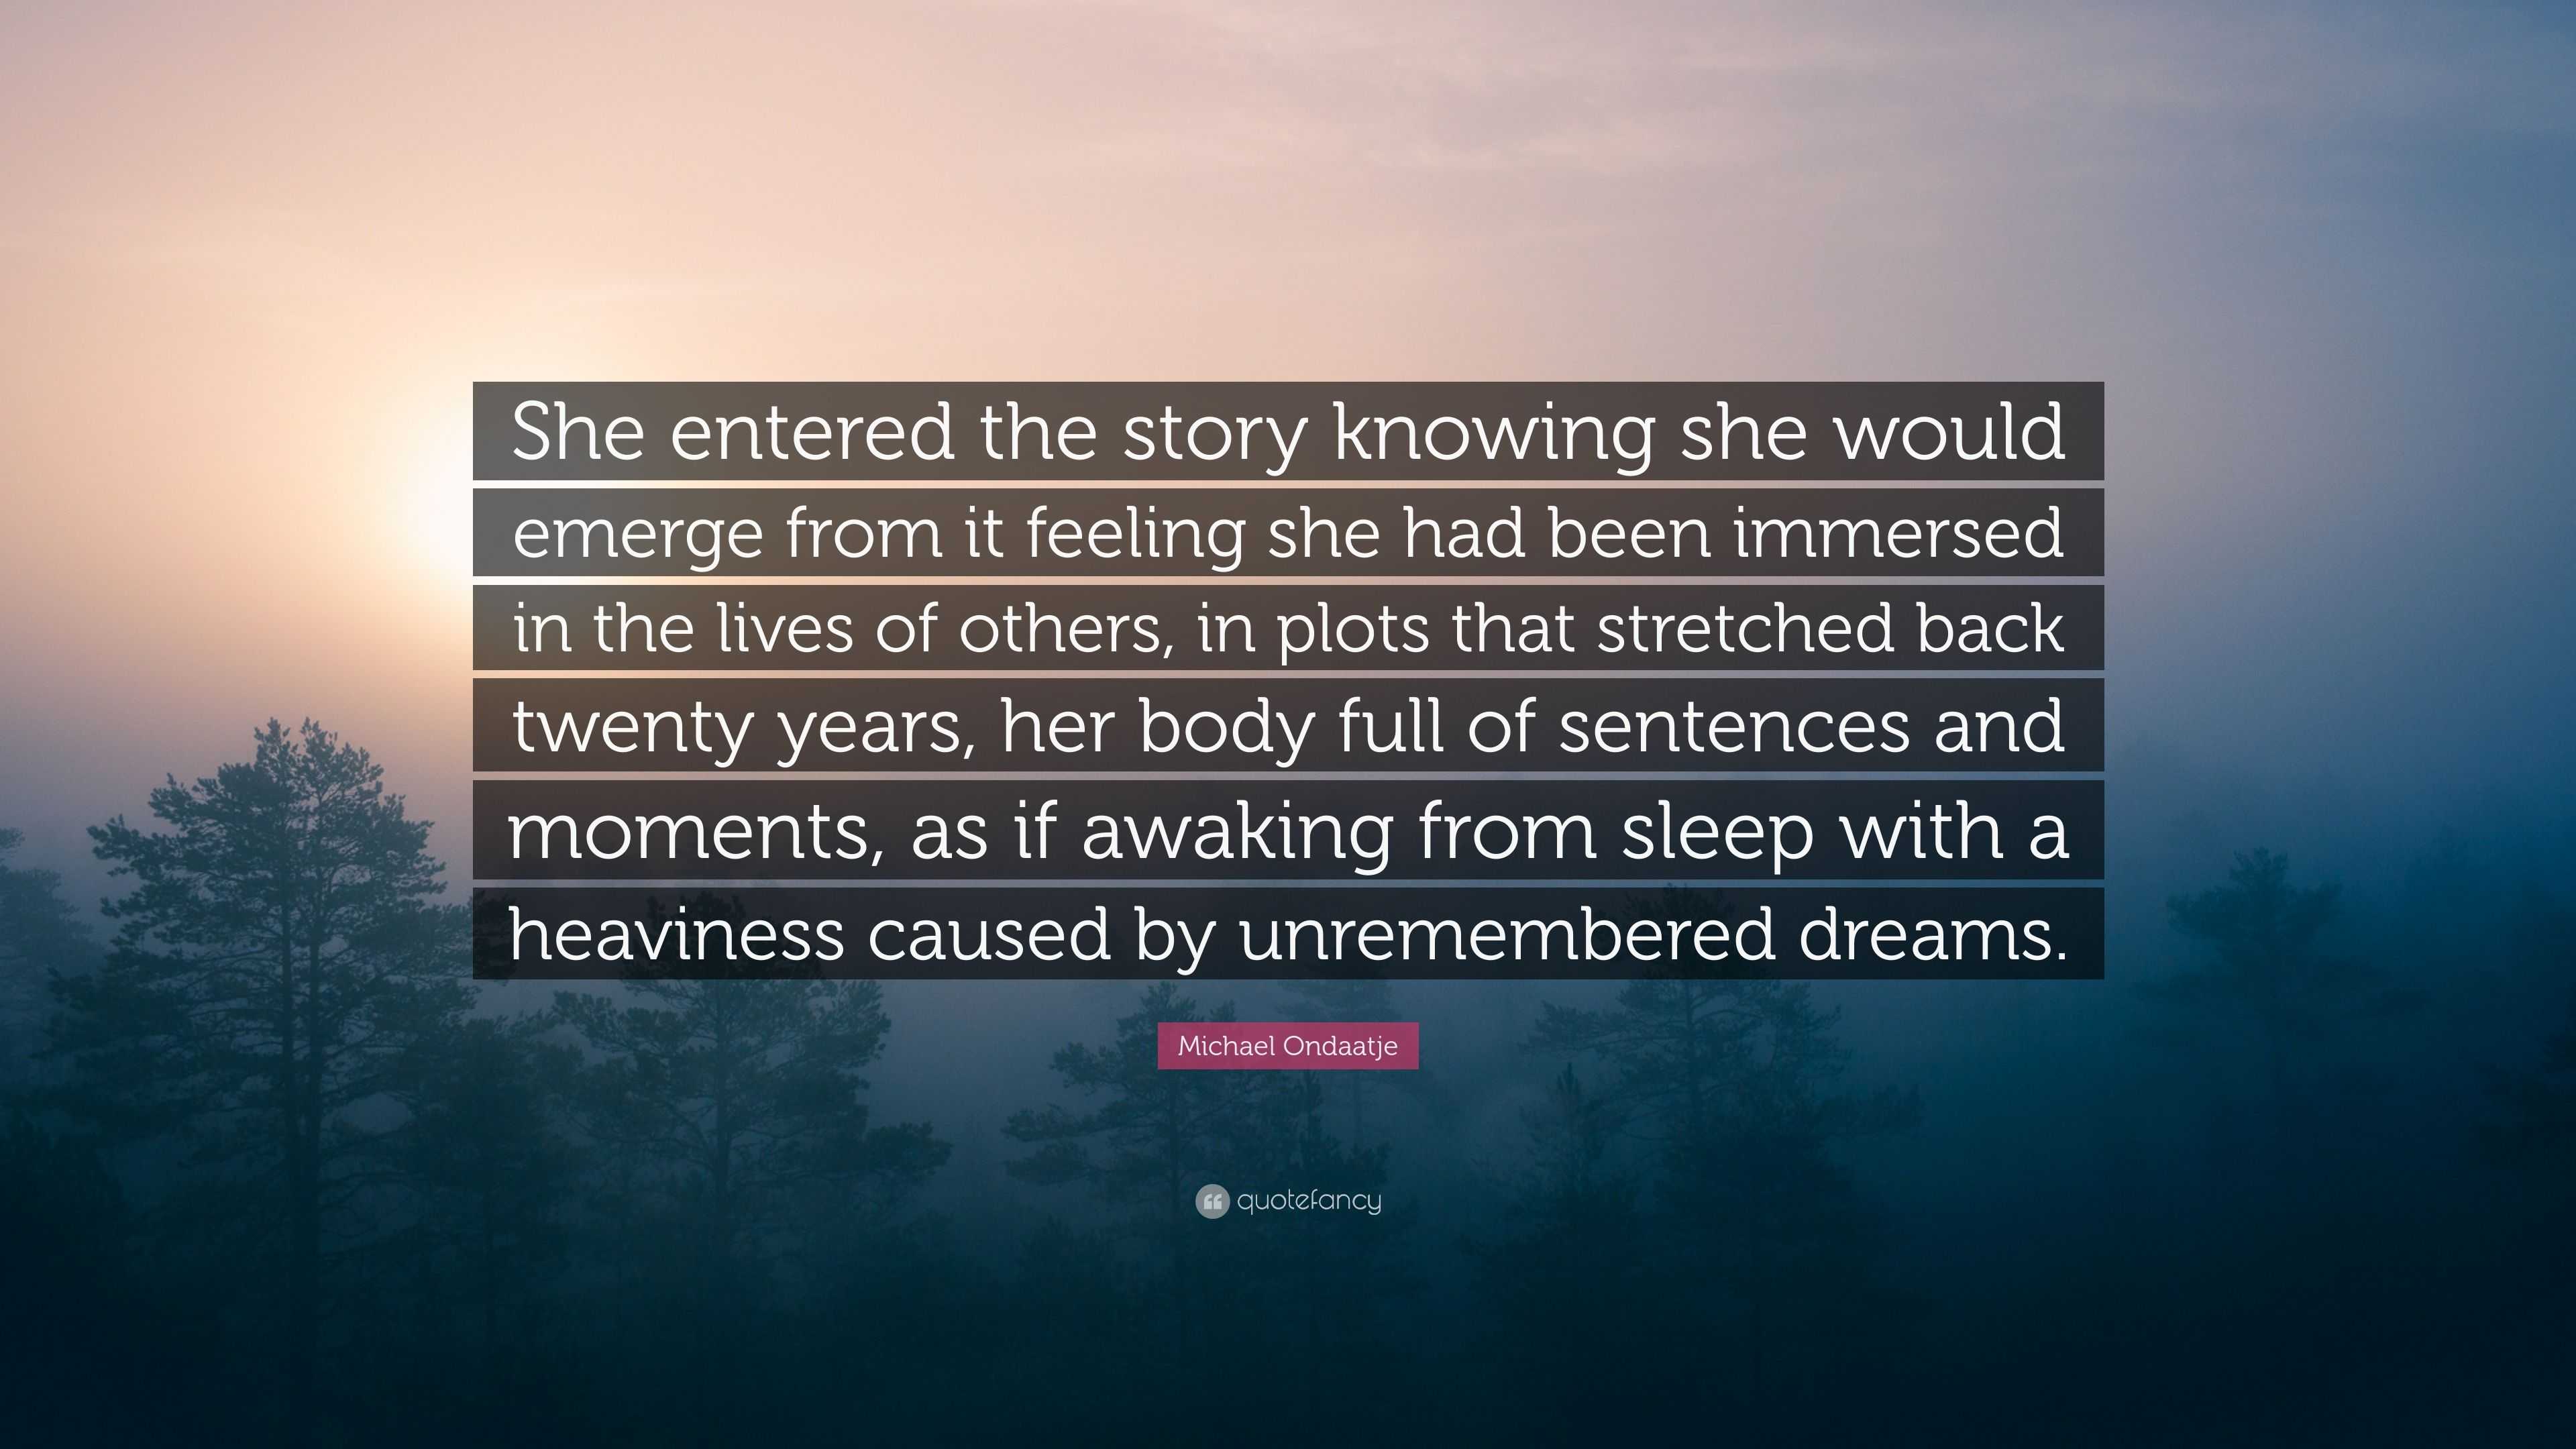 Michael Ondaatje Quote “she Entered The Story Knowing She Would Emerge From It Feeling She Had